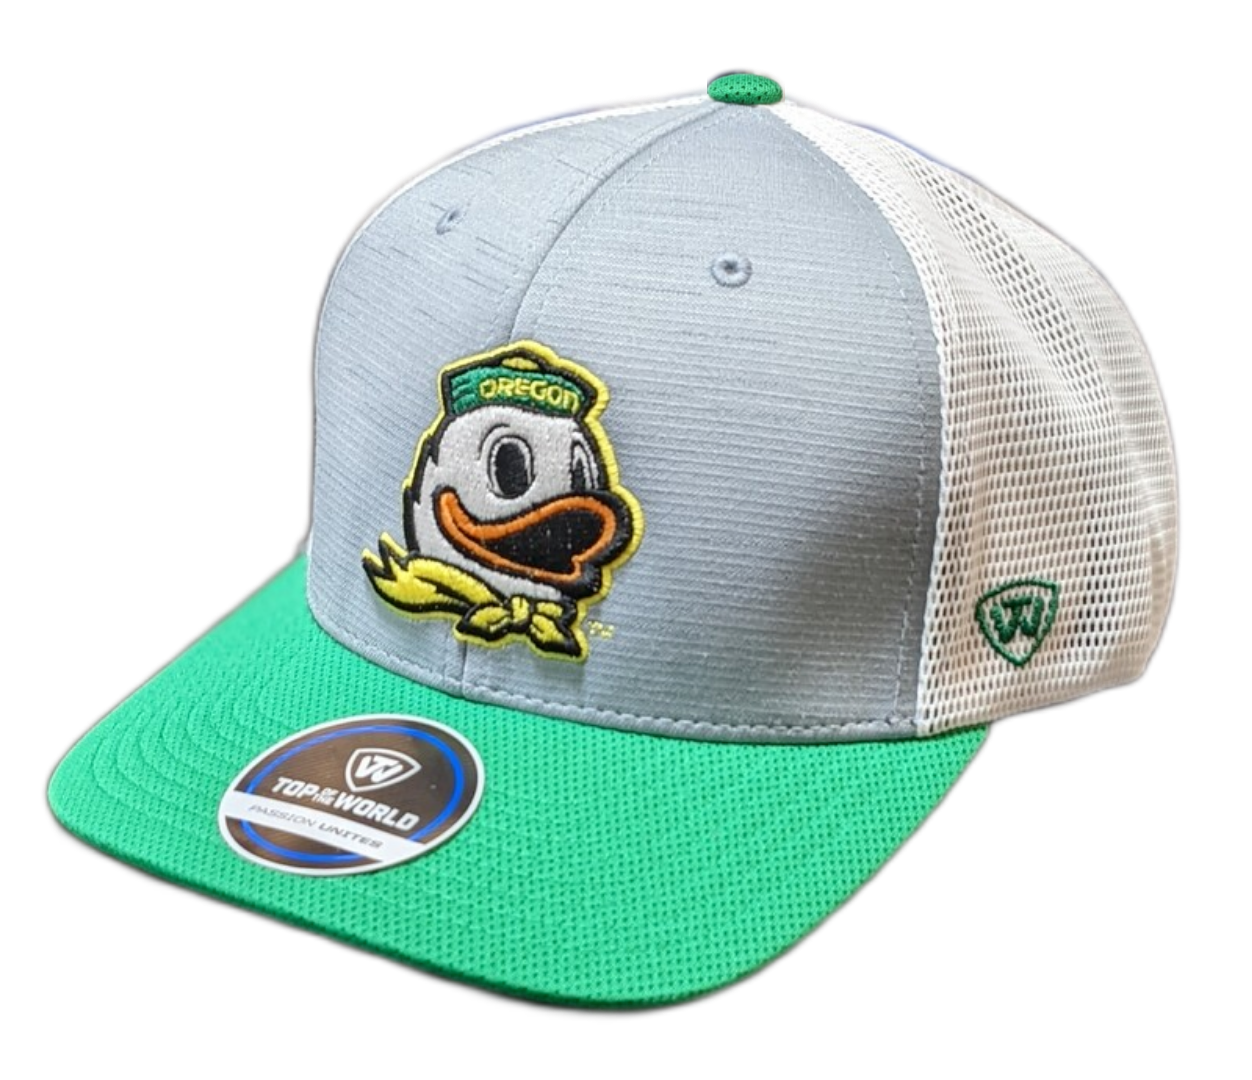 Men's Oregon Ducks Stamp 3-Tone Adjustable Hat By Top Of the World